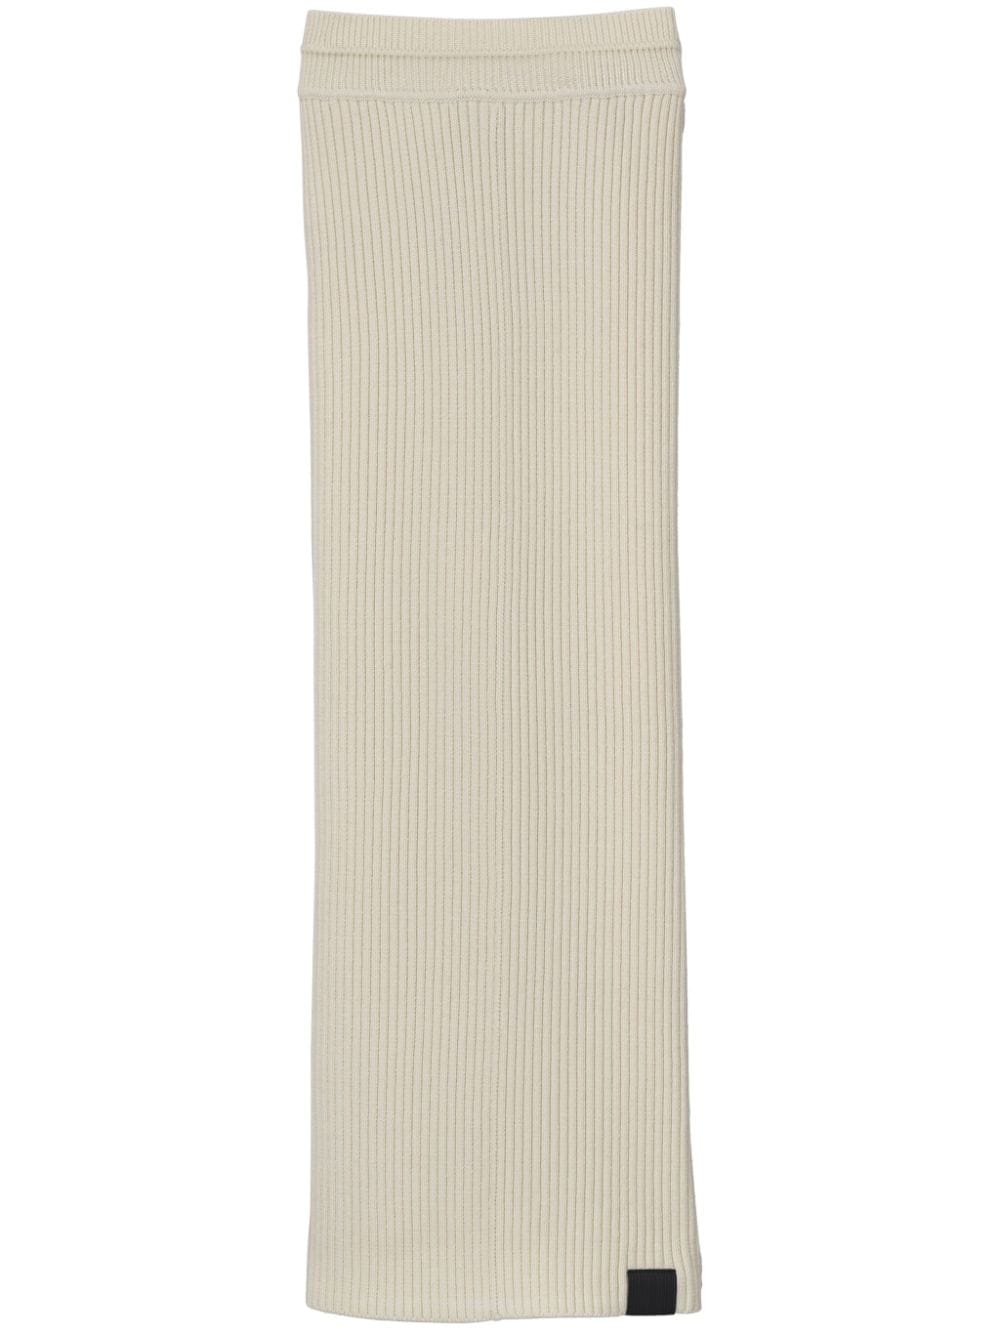 Marc Jacobs ribbed tube skirt - Neutrals von Marc Jacobs